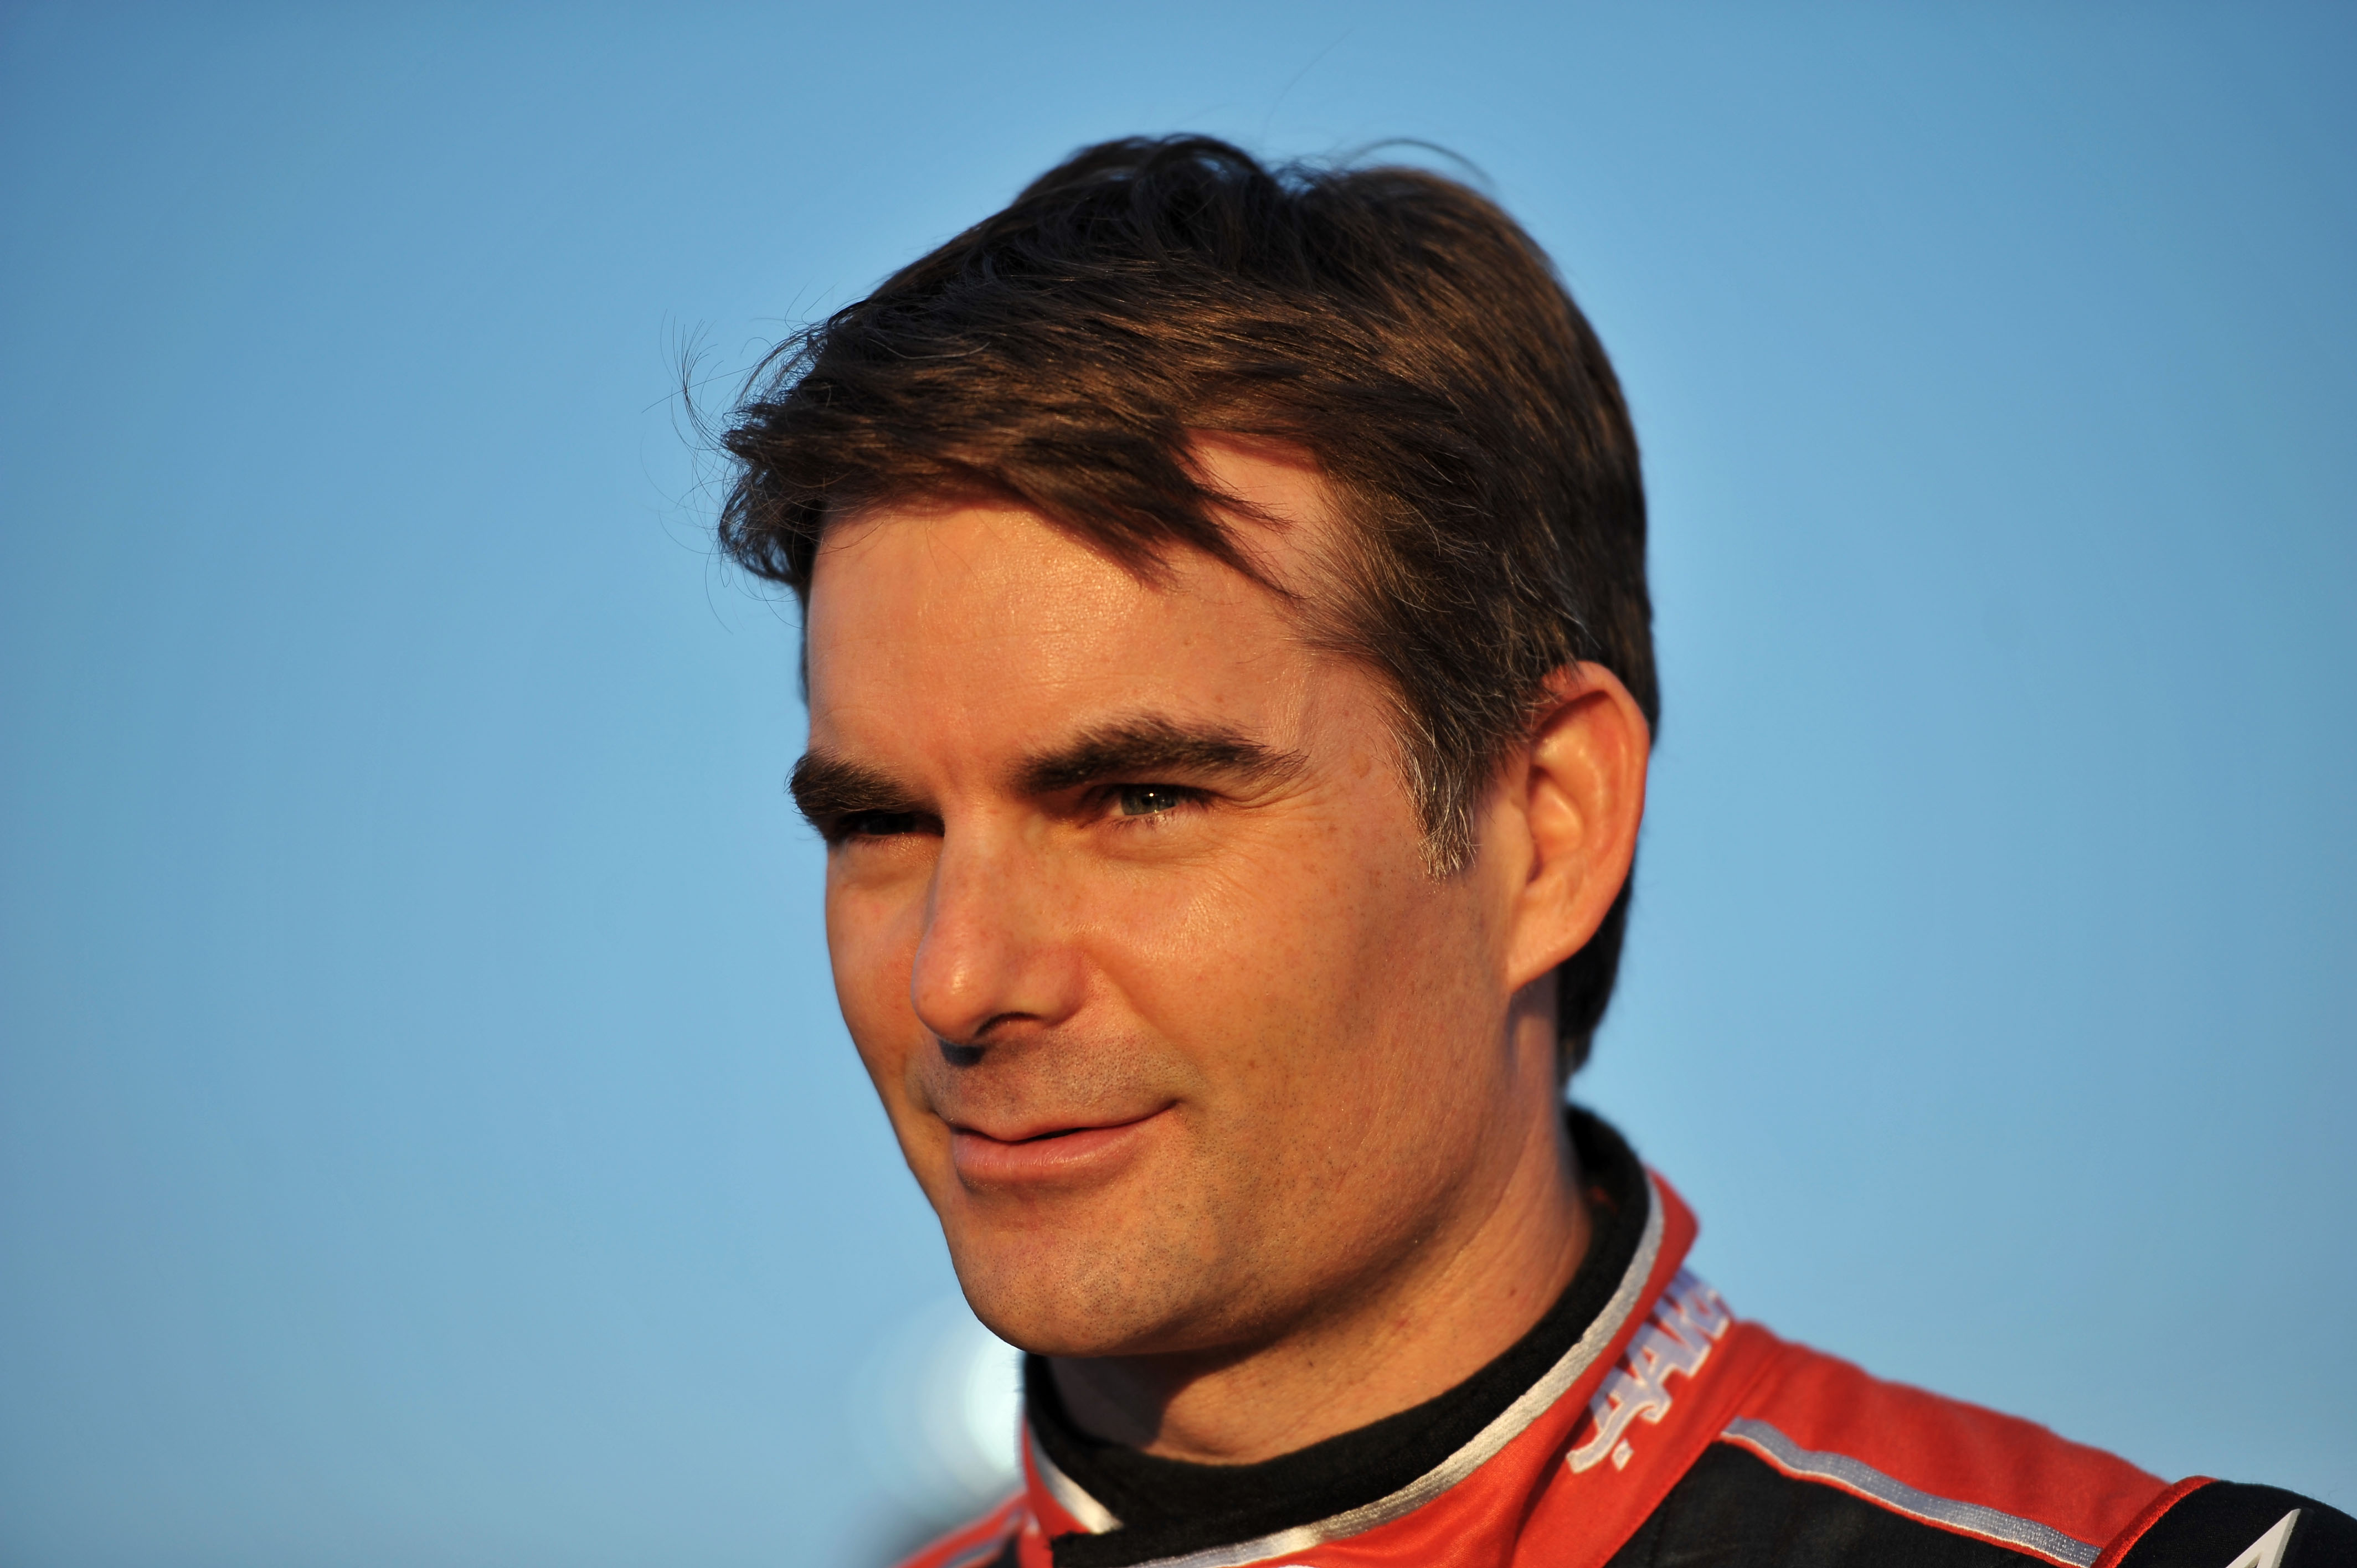 DARLINGTON, SC - MAY 07:  Jeff Gordon, driver of the #24 Drive to End Hunger Chevrolet, stands on the grid prior to the NASCAR Sprint Cup Series SHOWTIME Southern 500 at Darlington Raceway on May 7, 2011 in Darlington, South Carolina.  (Photo by Drew Hall